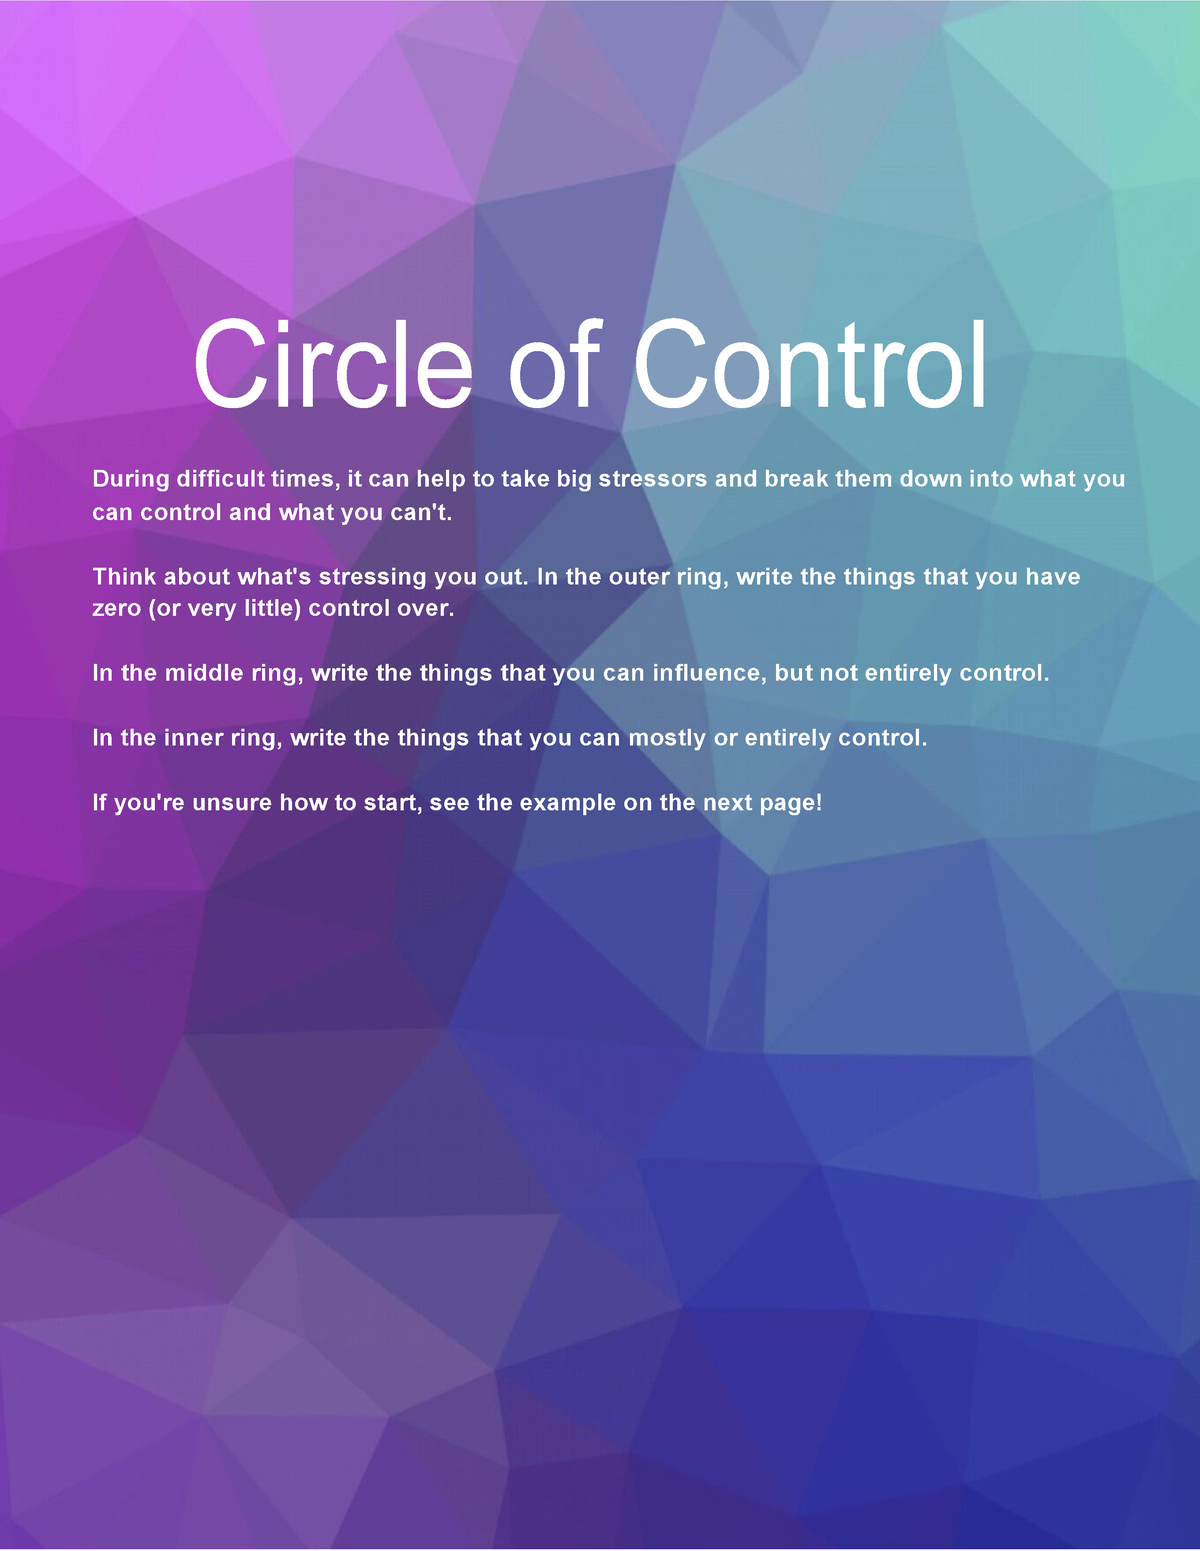 circle-of-control-circle-of-control-during-difficult-times-it-can